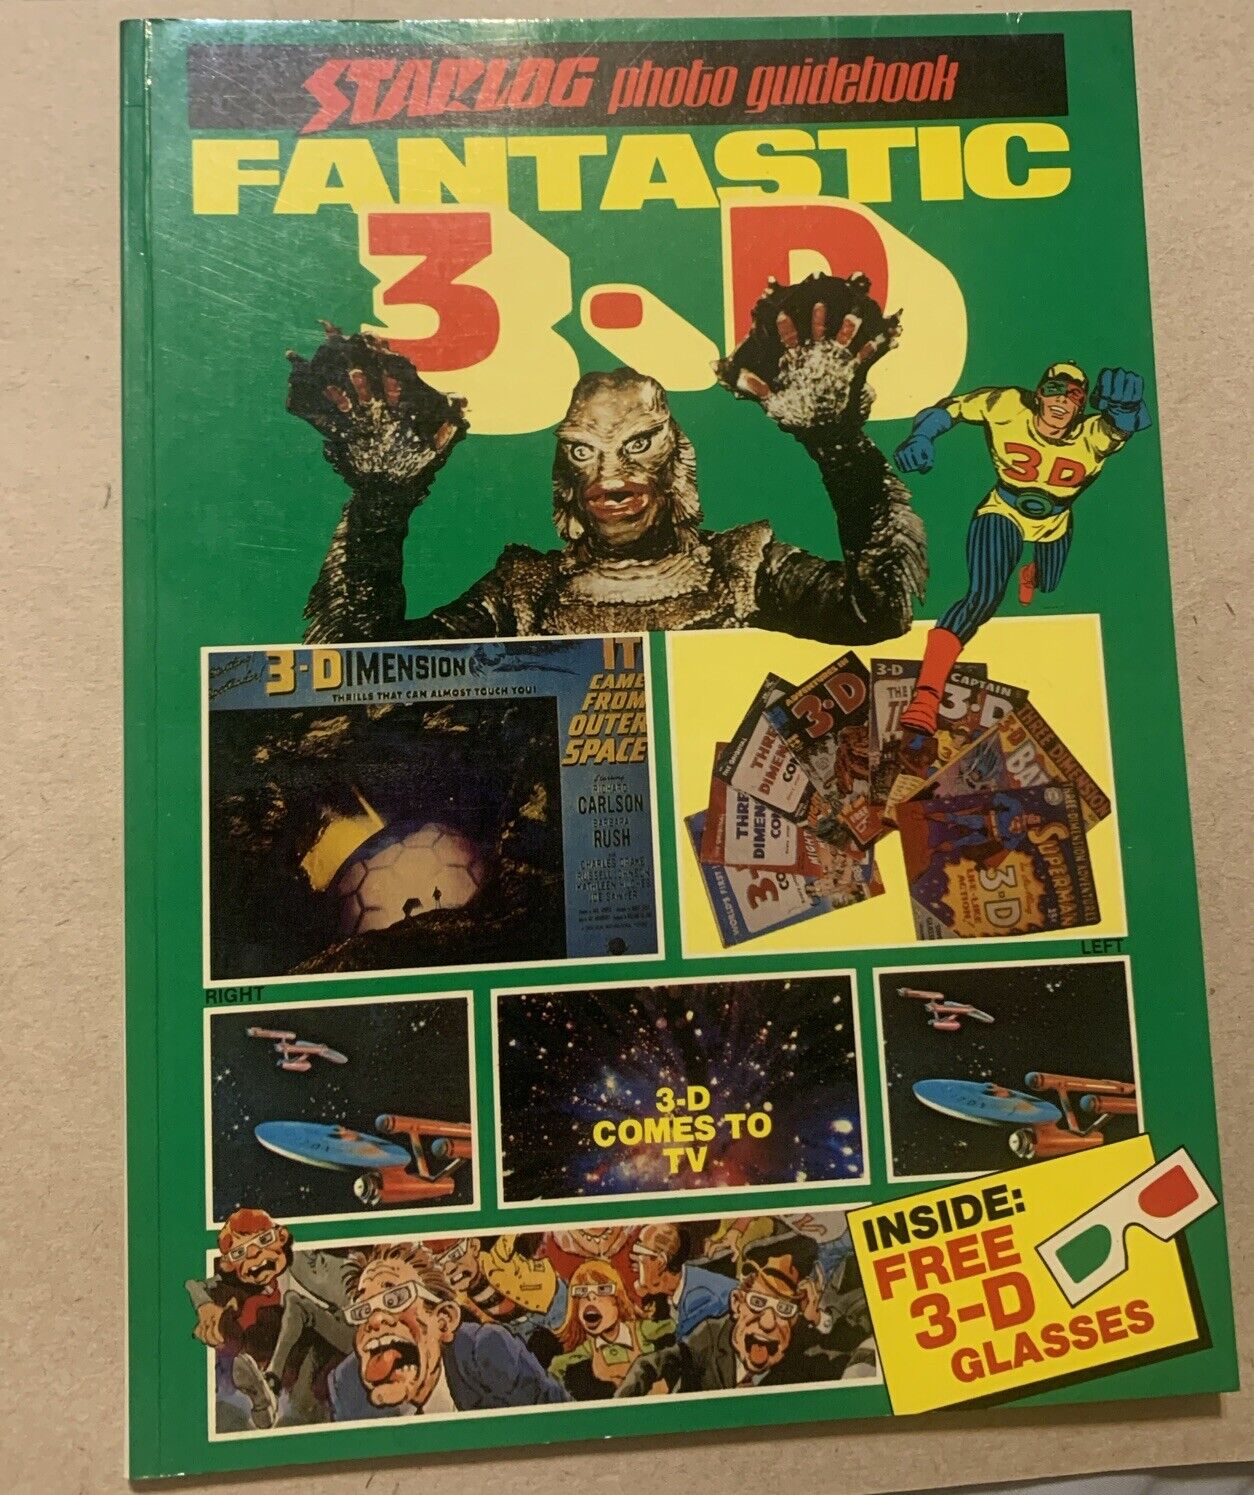 1982 Starlog Photo Guide Book Fantastic 3-D w/3D Glasses 98 Pages Long Guidebook